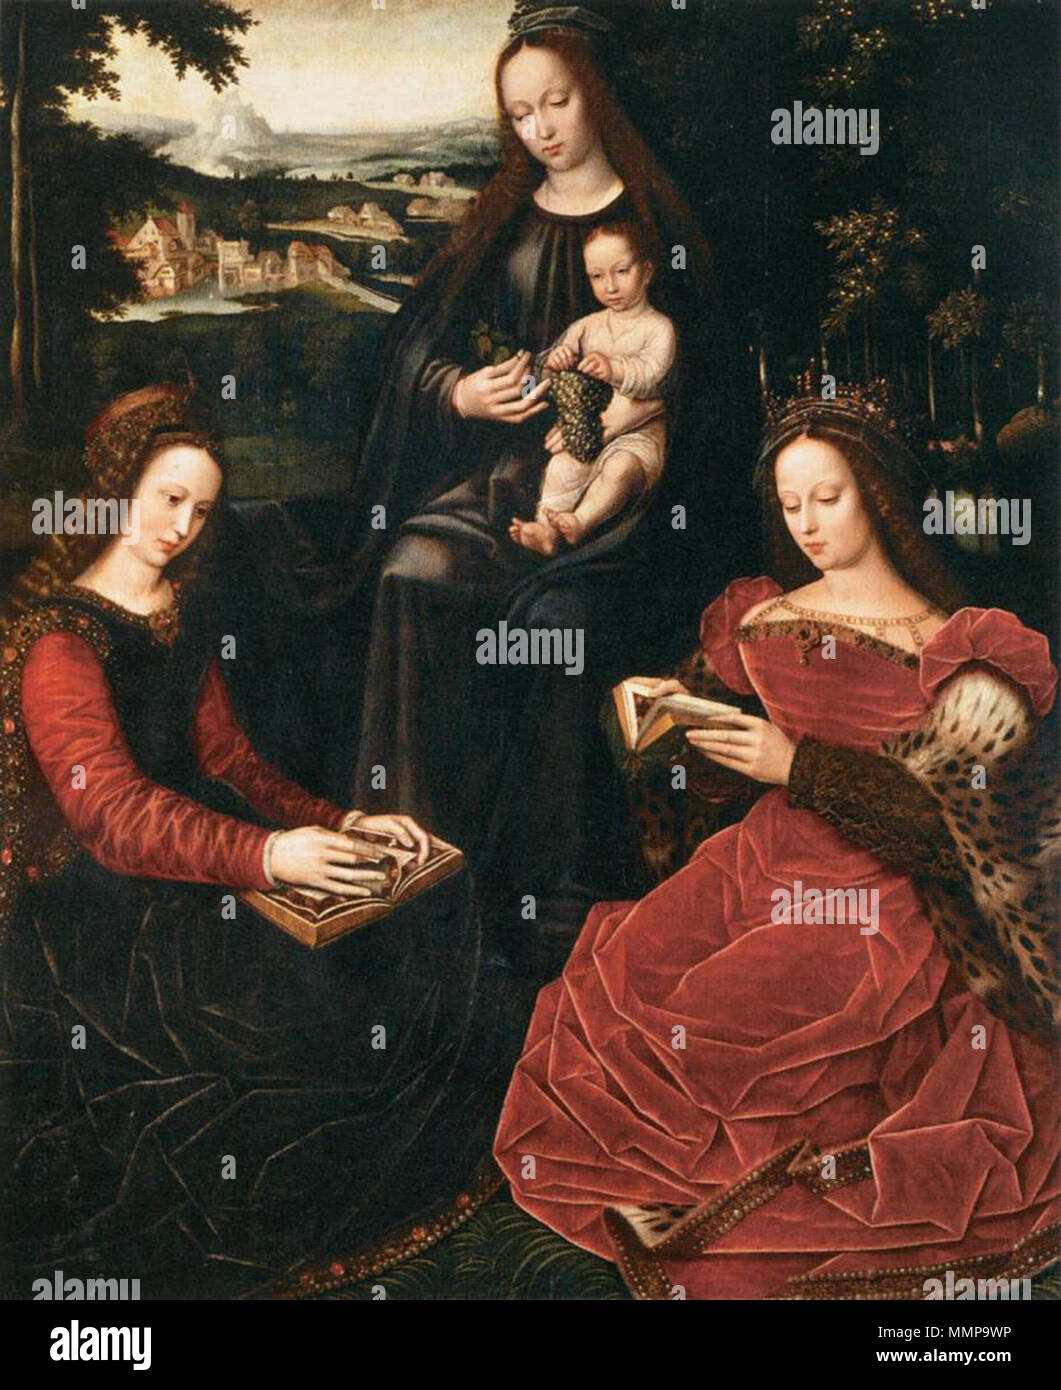 Virgin and Child with Saints. between 1530 and 1532. Ambrosius Benson - Virgin and Child with Saints - WGA1894 Stock Photo